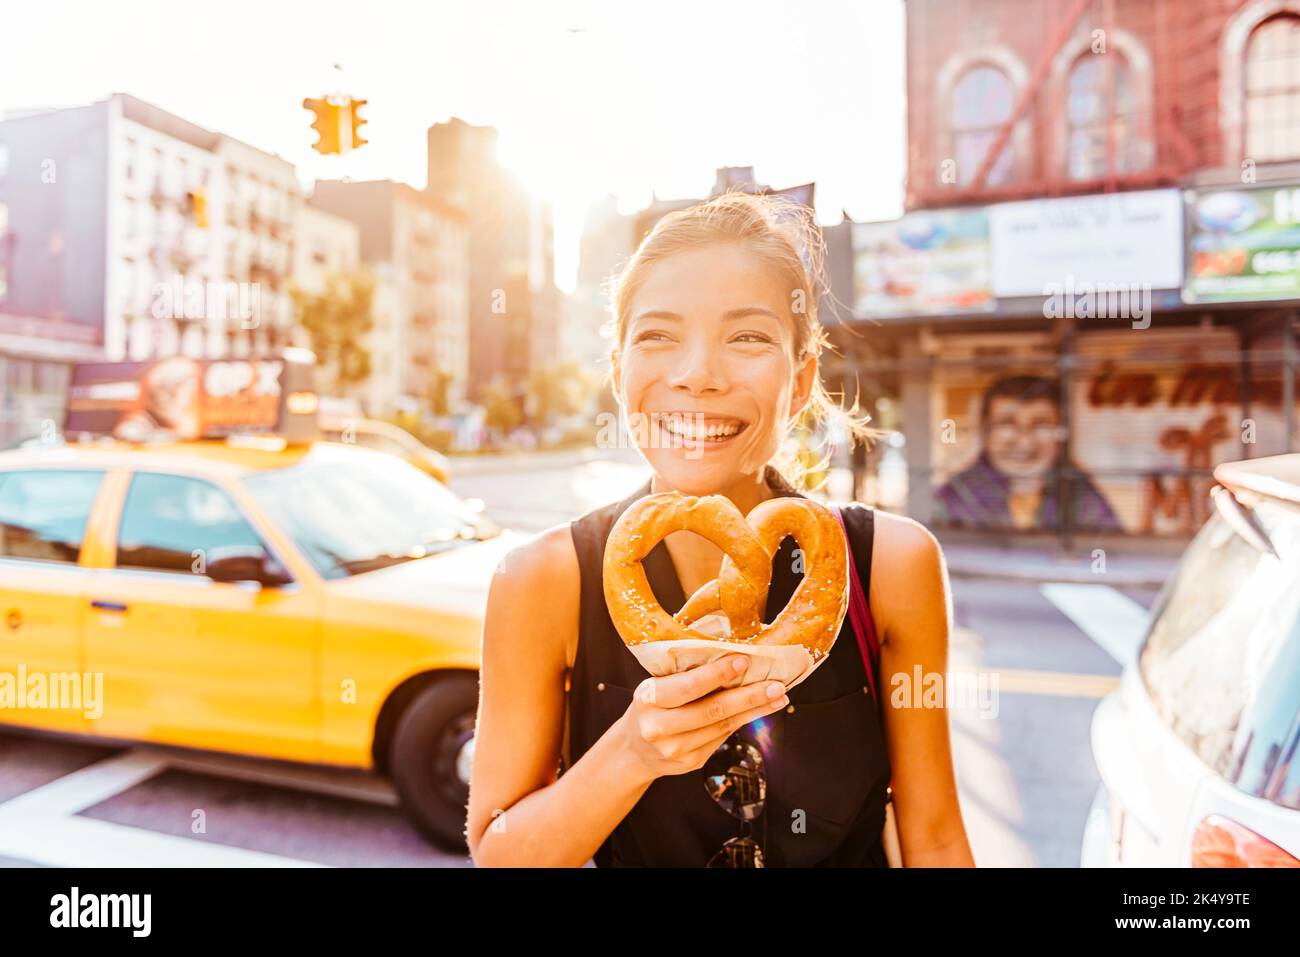 New York people lifestyle photo. Woman eating pretzel in Manhattan, a classic New York City snack. Multiracial asian young professional portrait Stock Photo